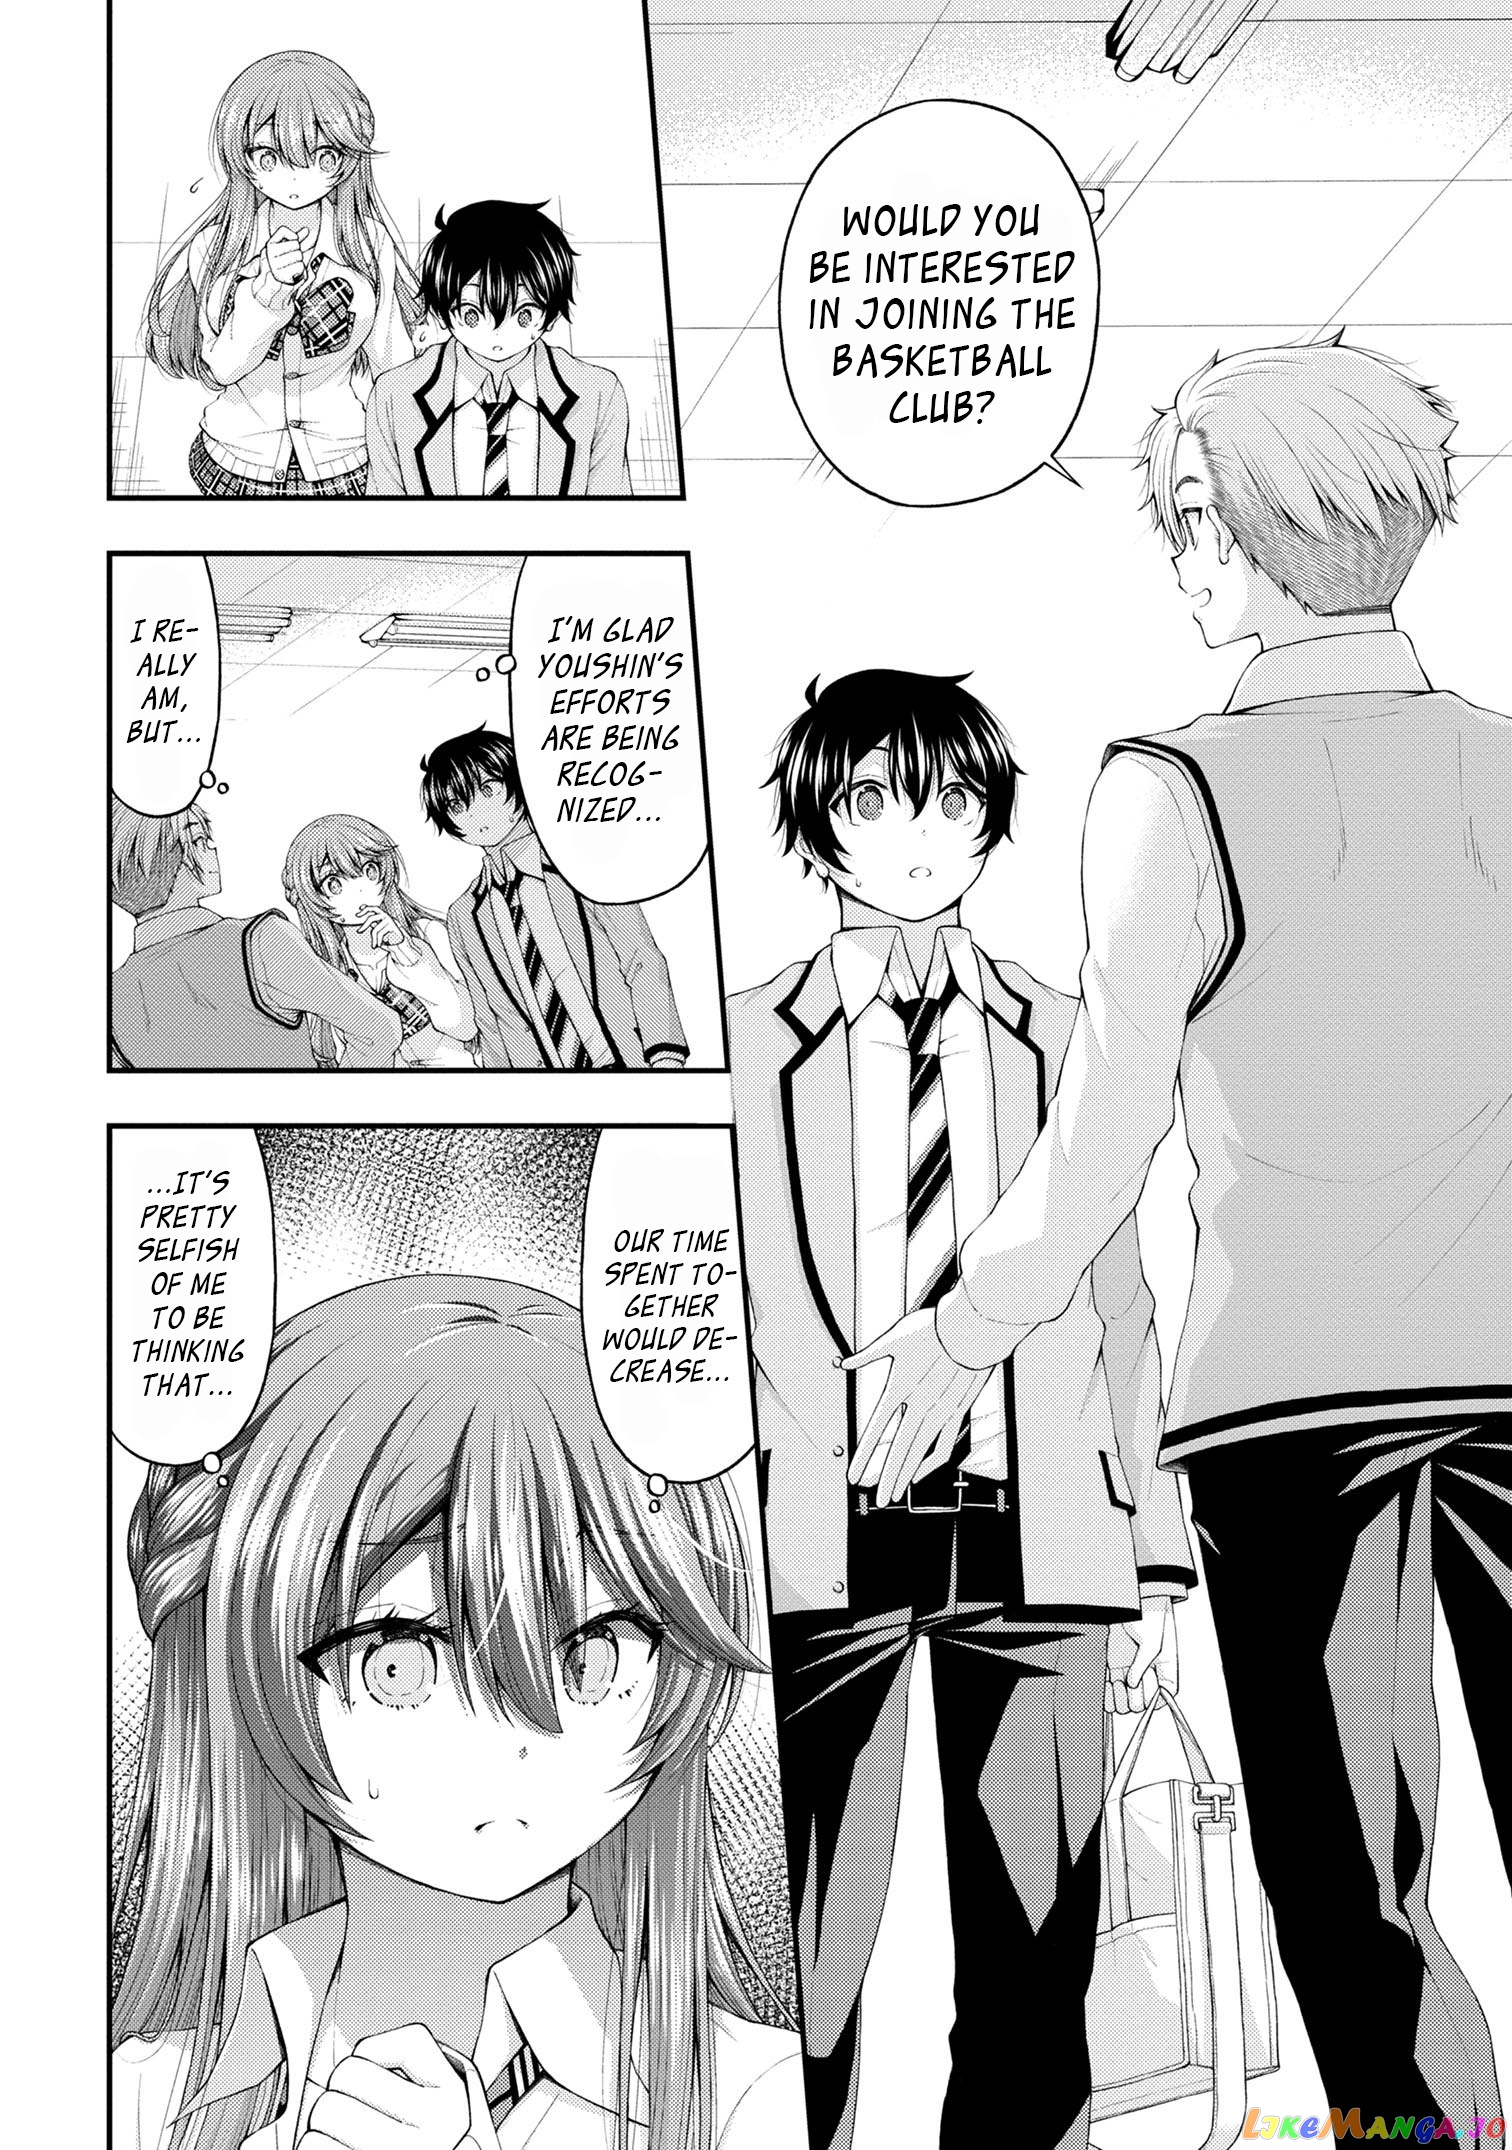 The Gal Who Was Meant to Confess to Me as a Game Punishment Has Apparently Fallen in Love with Me chapter 7.5 - page 18